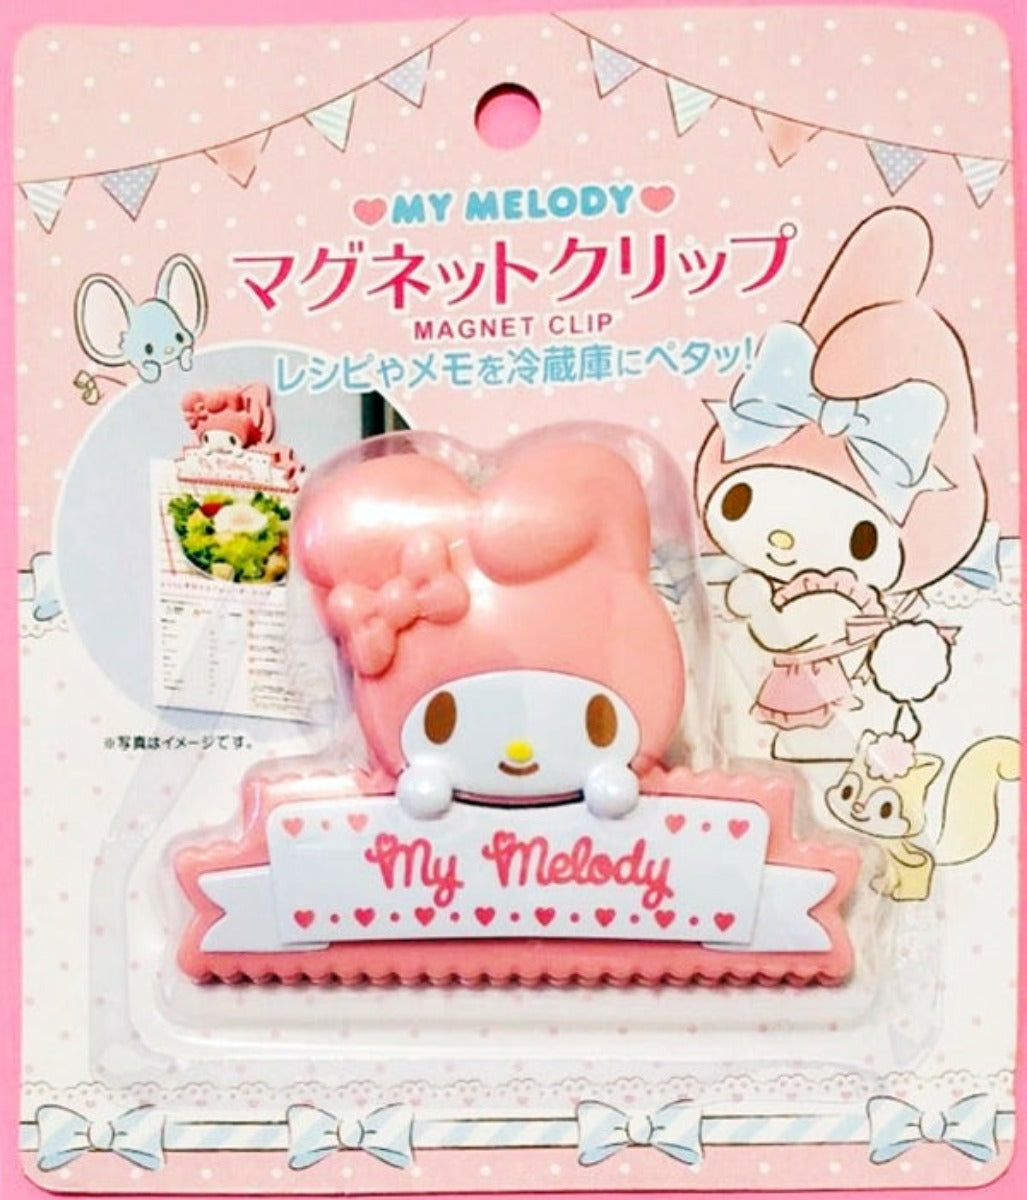 My Melody Magnet Clip